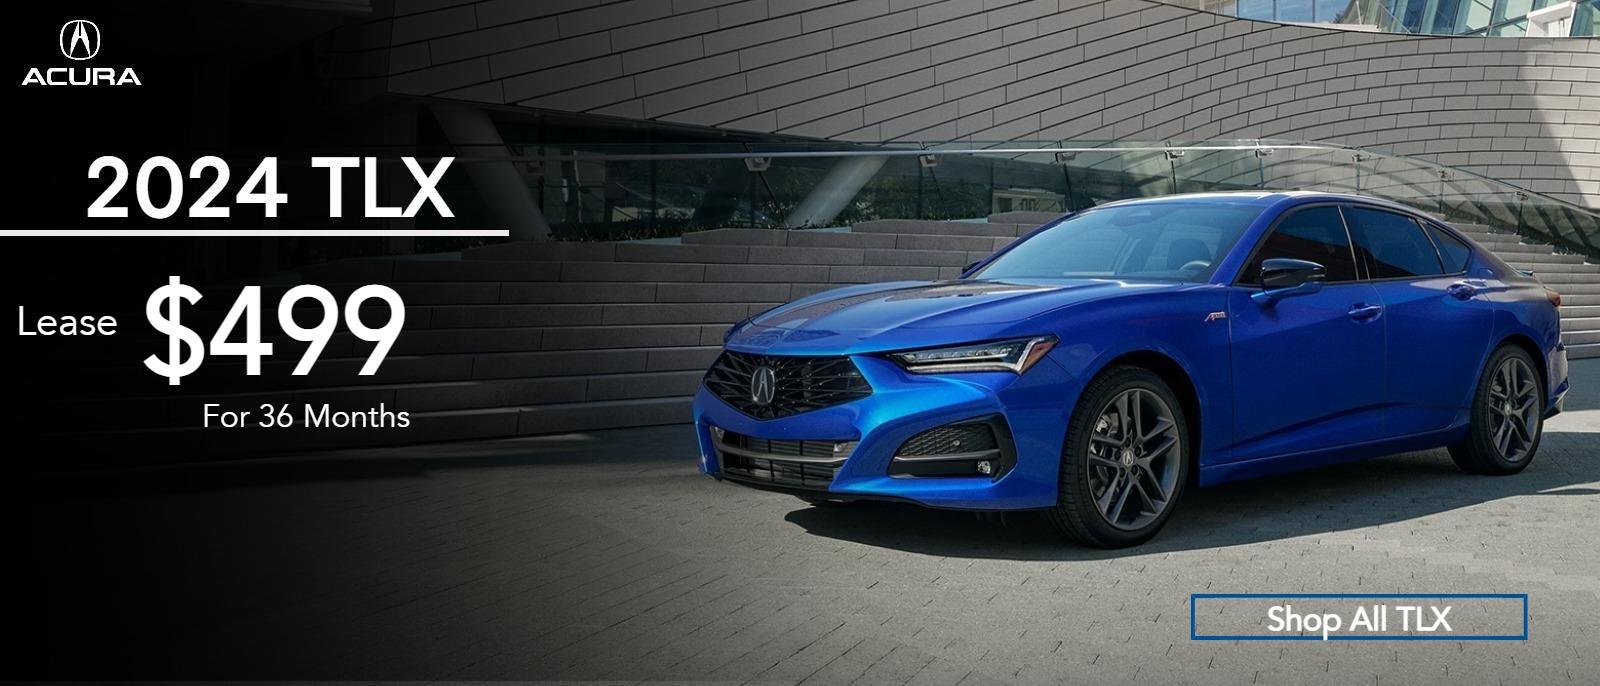 Acura TLX Parked outdoor 

Lease $499* Per month for 36 months. $5,299 Total due at signing.

*Closed-end lease for 2024 TLX TECH 10 Speed Automatic vehicles (UB5F4RGNW) available from May 1, 2024 through July 1, 2024, available to well-qualified lessees approved by Acura Financial Services. Not all lessees will qualify. Higher lease rates apply for lessees with lower credit ratings. Lease offers vary based on MSRP. MSRP $46,195.00 (includes destination; excludes taxes, titles, license and documentary service fees). Actual net capitalized cost $40,705.58. Net capitalized cost includes $595 acquisition fee. Dealer contribution may vary and could affect actual lease payment. Total monthly payments $17,964.00. Option to purchase at lease end $25,407.25.
Must take new retail delivery of vehicle from dealer stock by July 1, 2024. Lessee responsible for maintenance, excessive wear/tear and 15¢/mile over 10,000 miles/year for vehicles with MSRP less than $30,000, and 20¢/mile over 10,000 miles/year for vehicles with MSRP of $30,000 or more. See your Acura dealer for complete details.